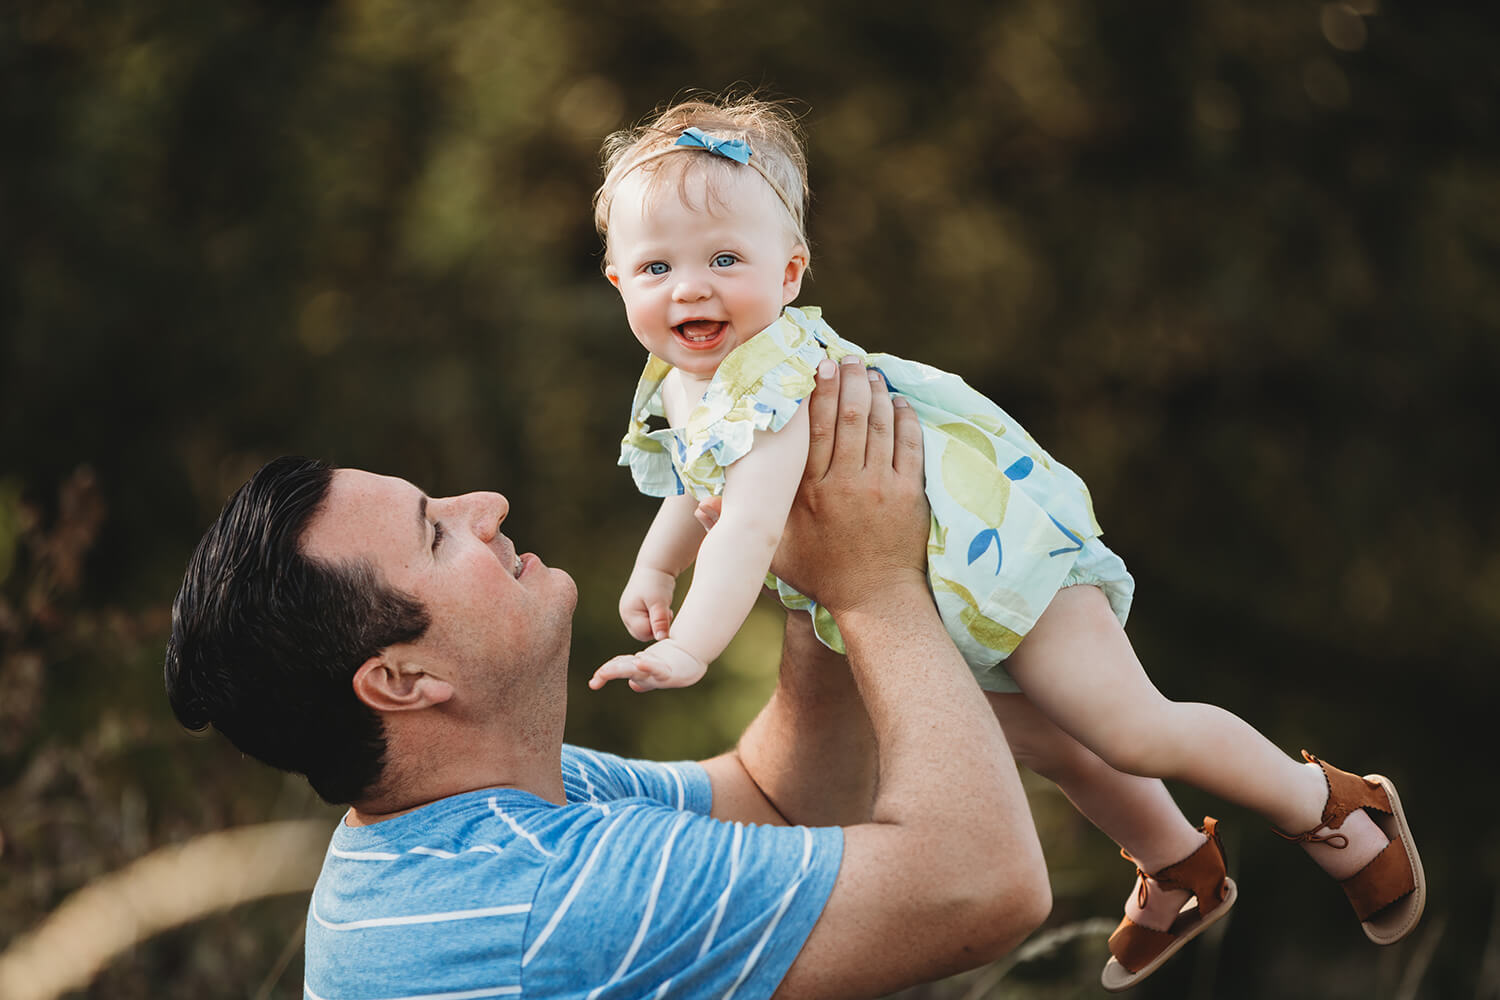 Outdoor family session of father with baby daughter.